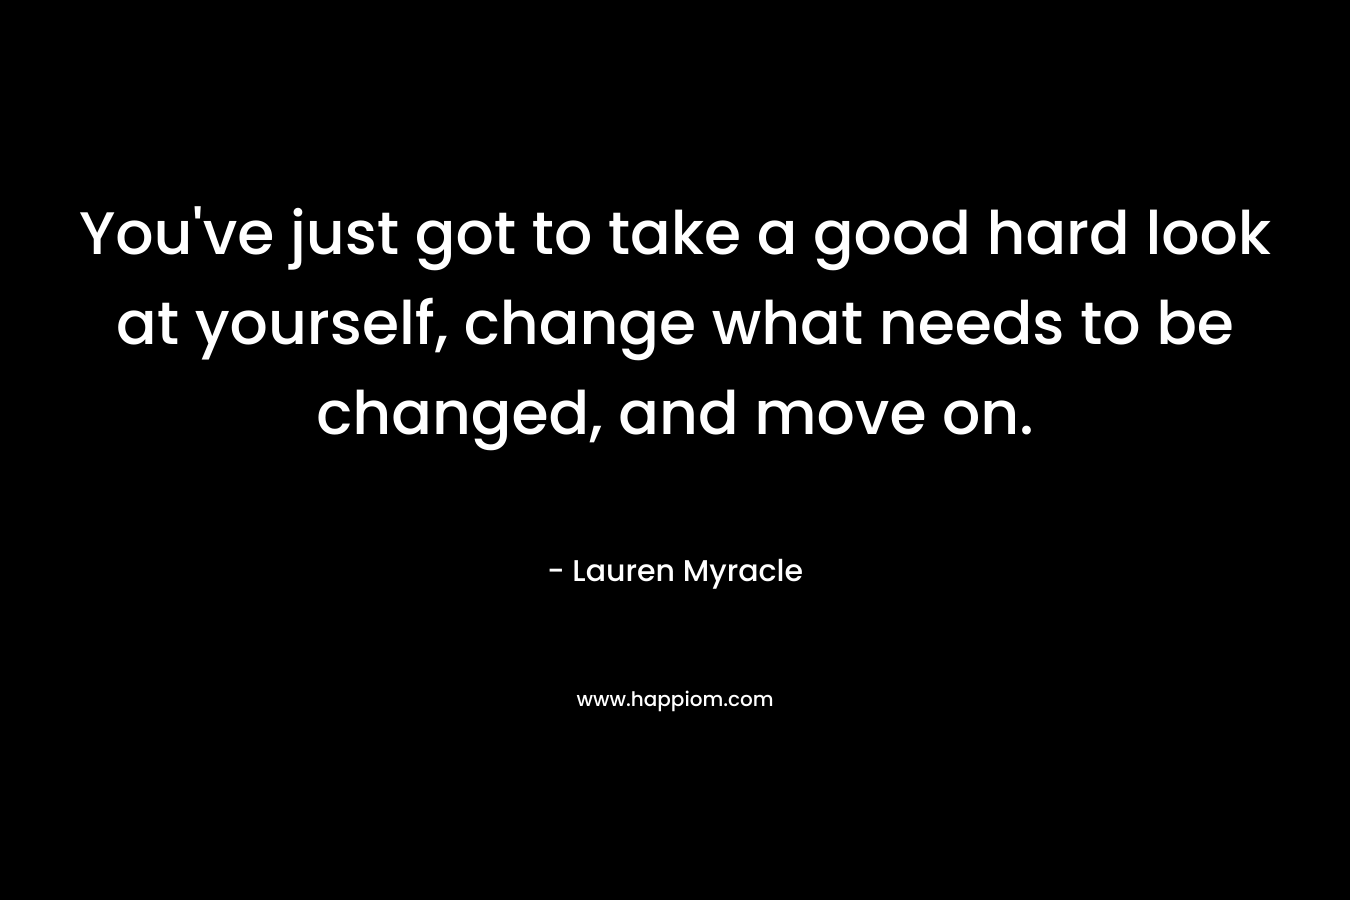 You’ve just got to take a good hard look at yourself, change what needs to be changed, and move on. – Lauren Myracle